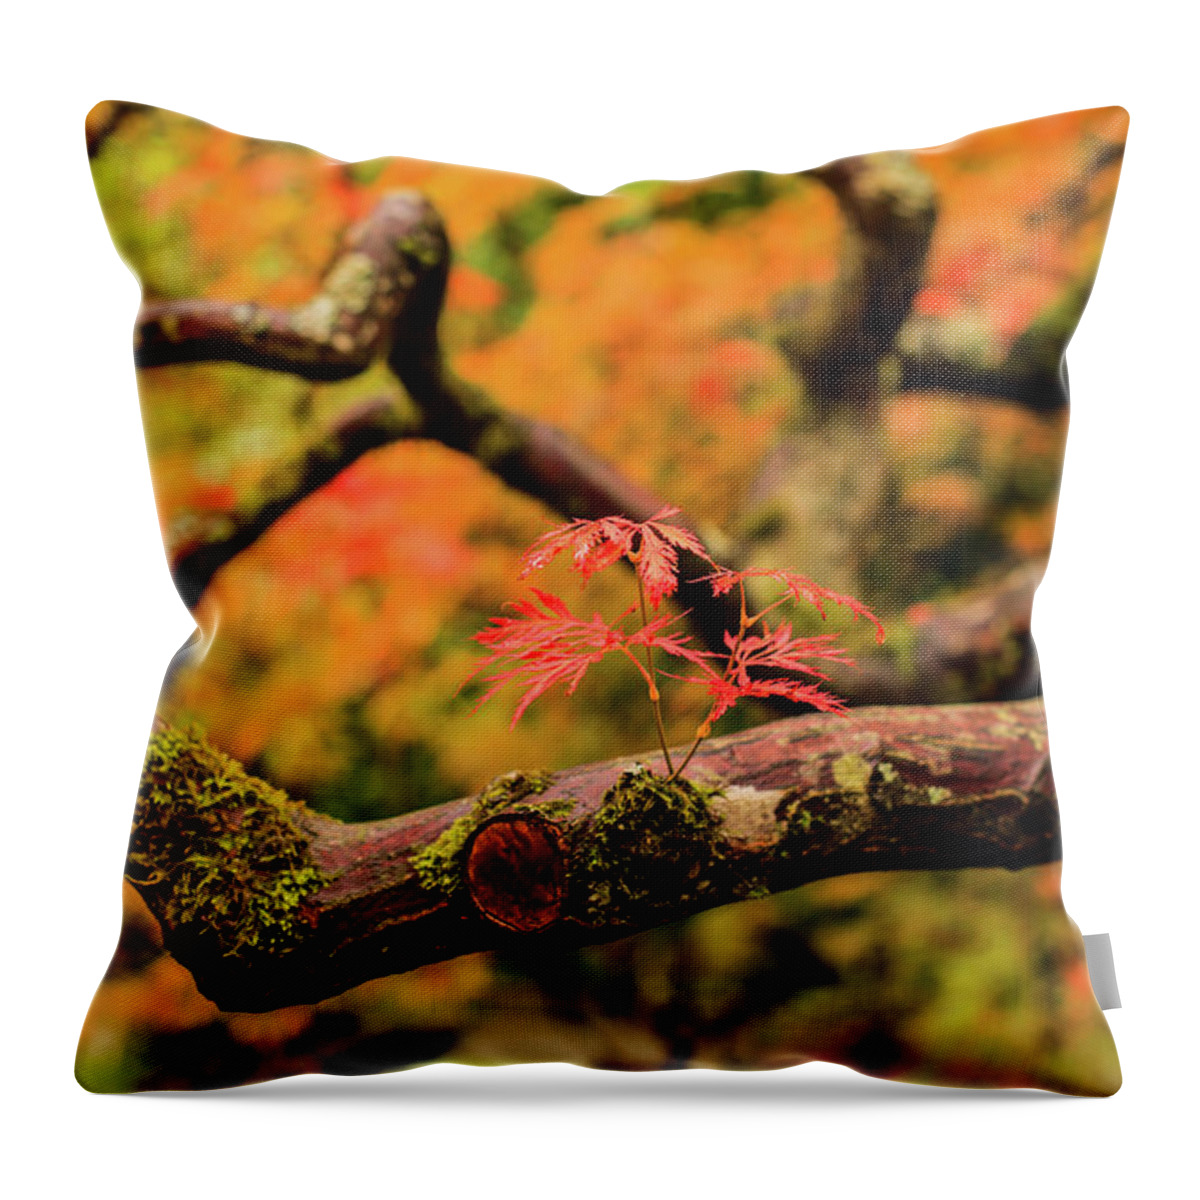 Japanese Garden Throw Pillow featuring the photograph Rebirth by Briand Sanderson